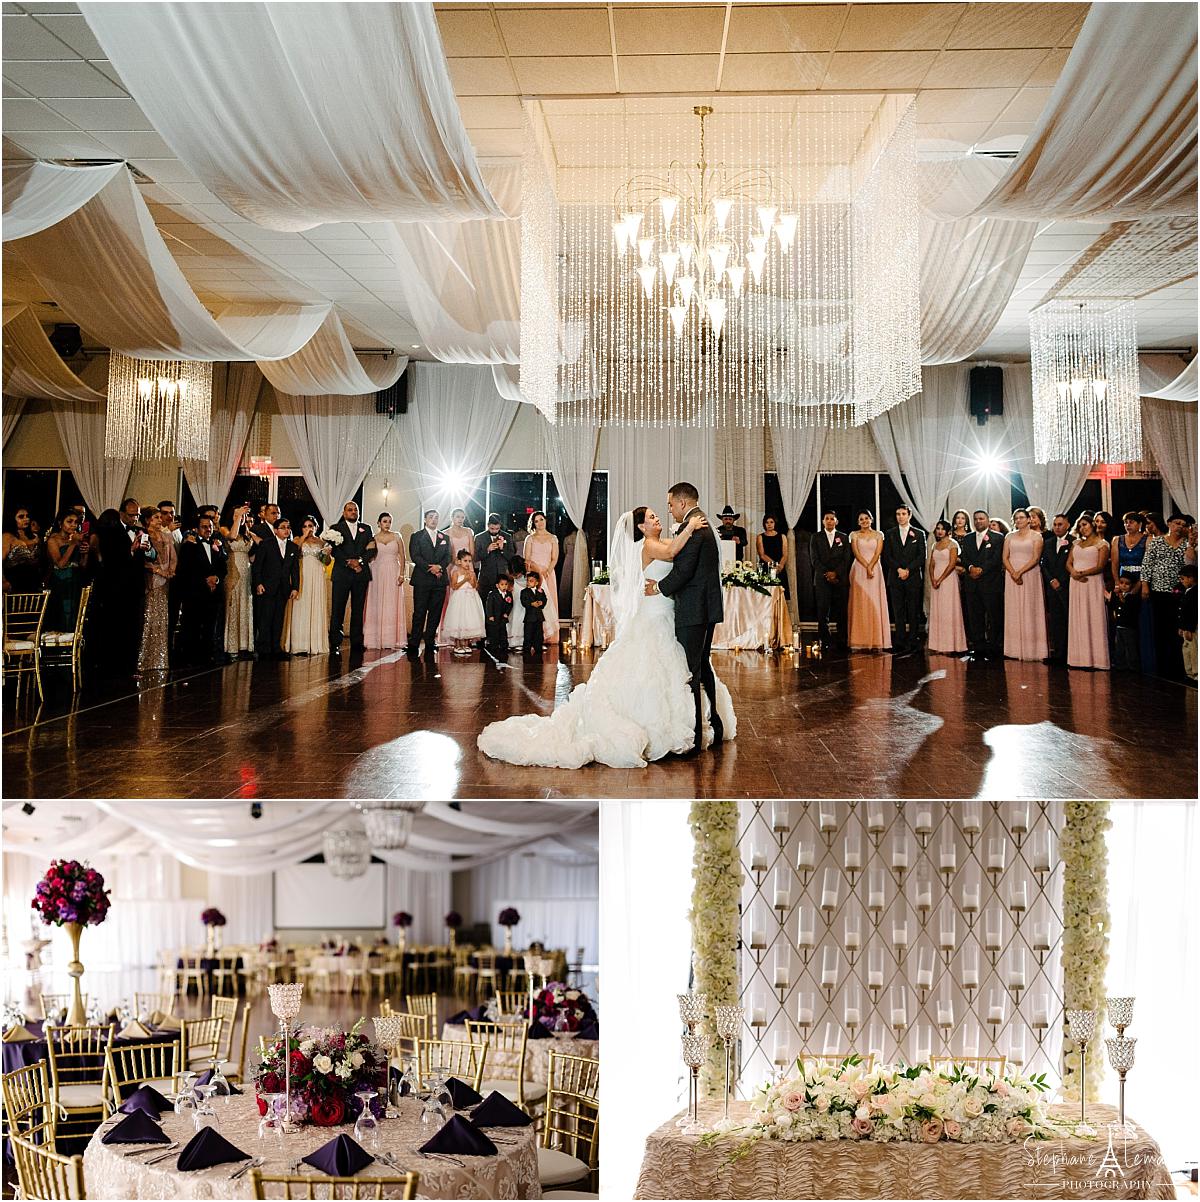 wedding reception at Grace Gardens wedding venue in el paso texas by stephane lemaire photography